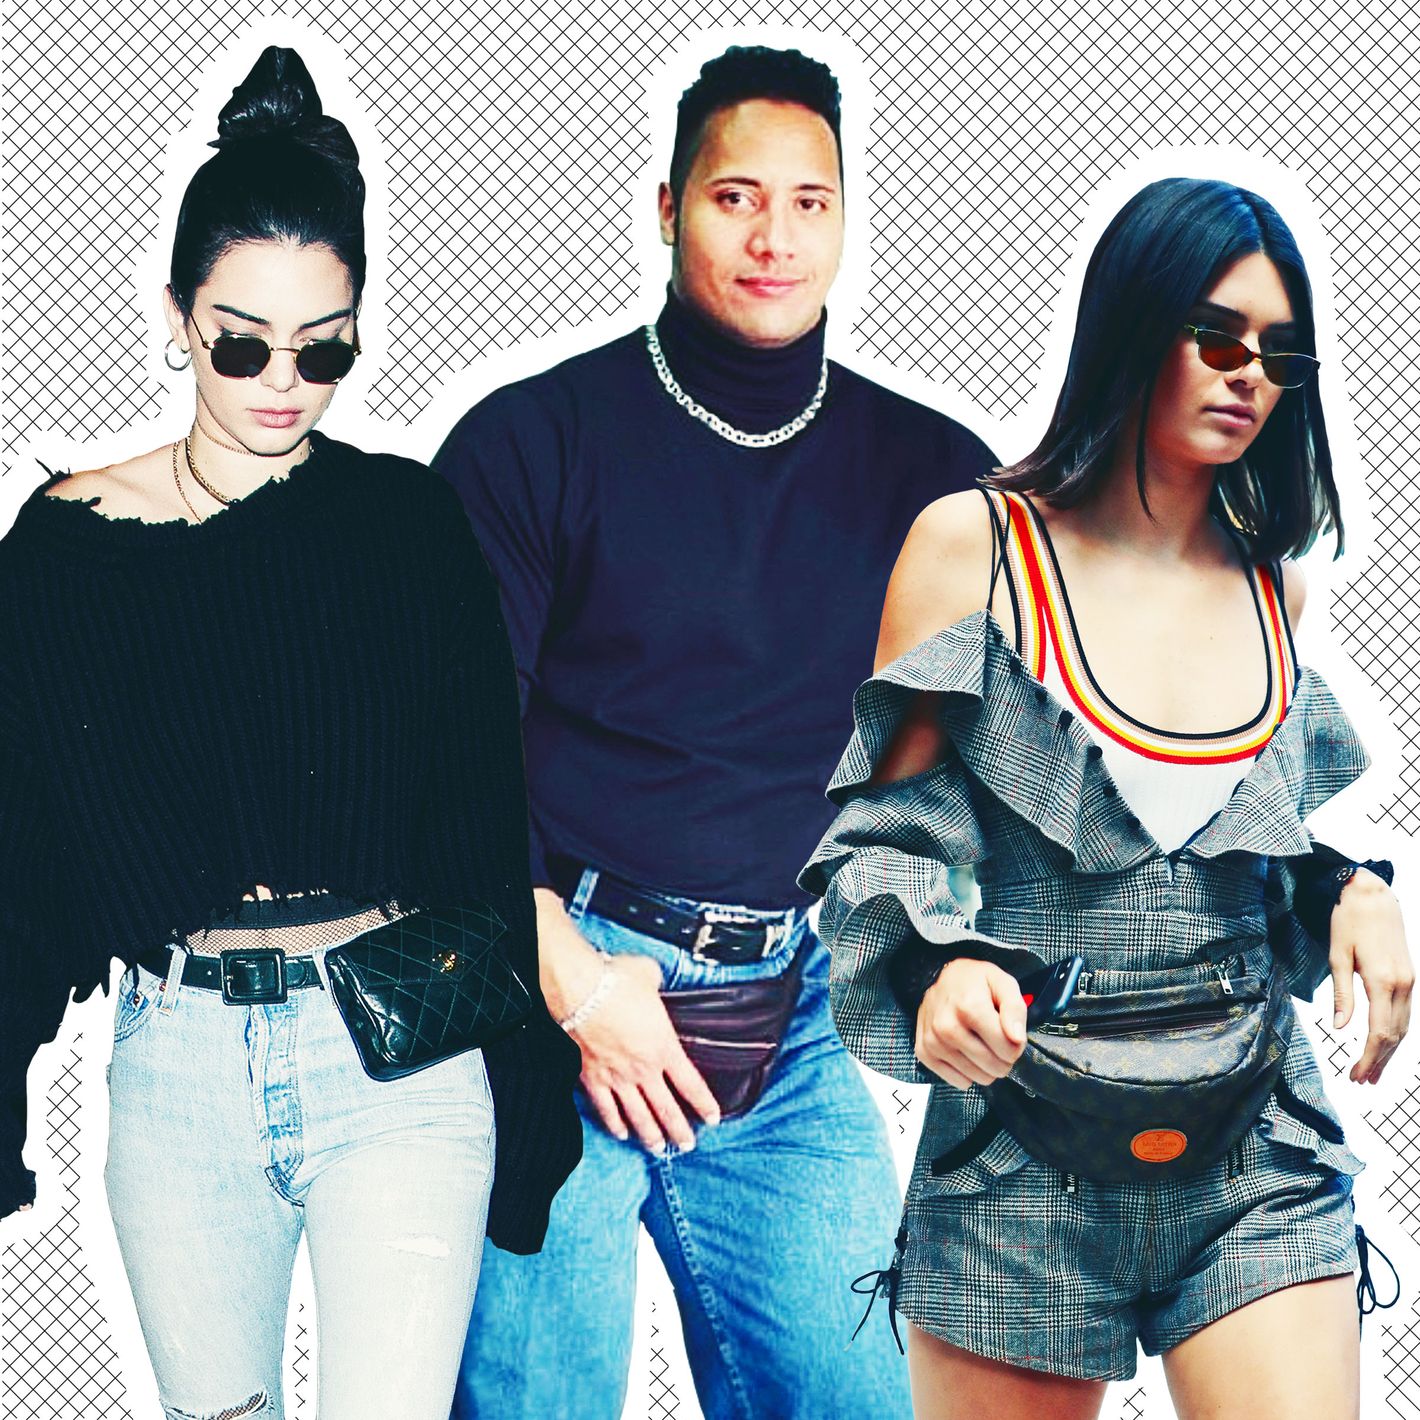 If You Need Style Inspo for the Fanny Pack Trend, Celebrities Have